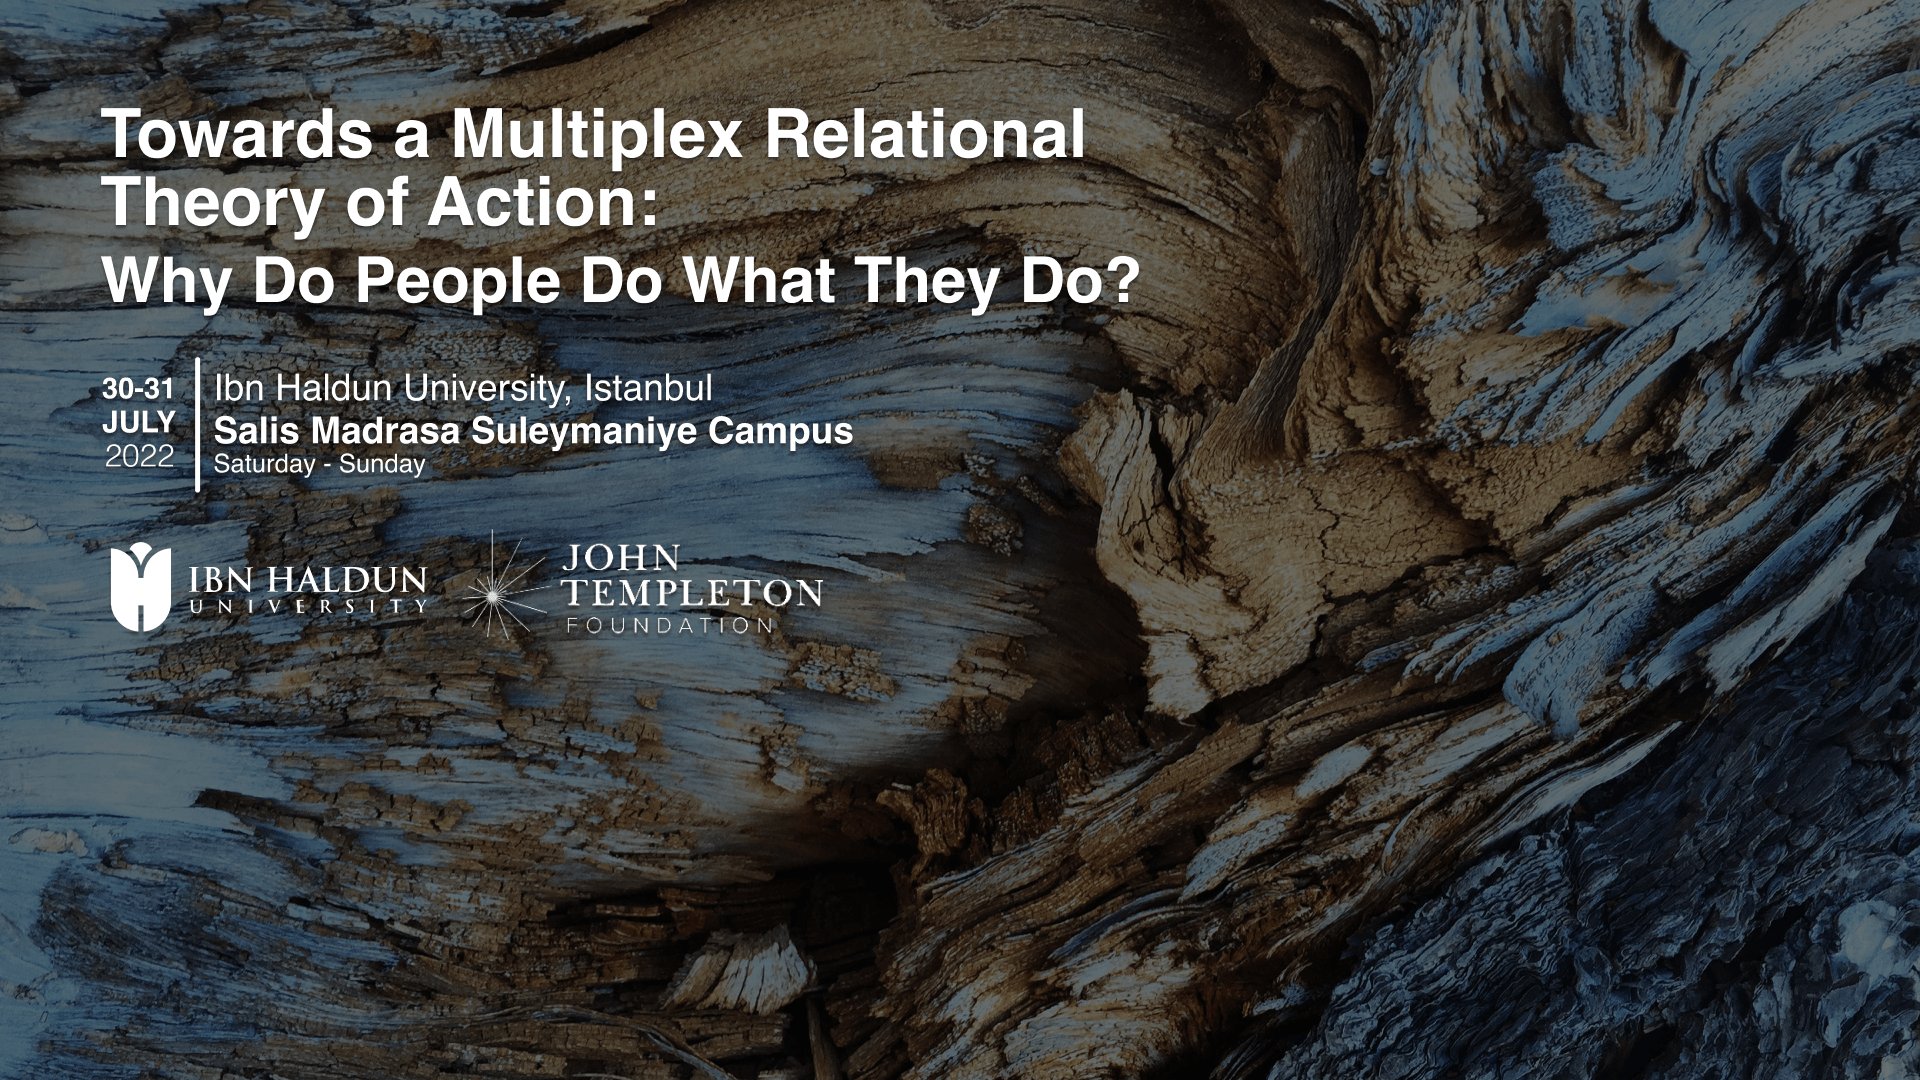 Towards a Multiplex Relational Theory of Action: Why Do People Do What They Do?